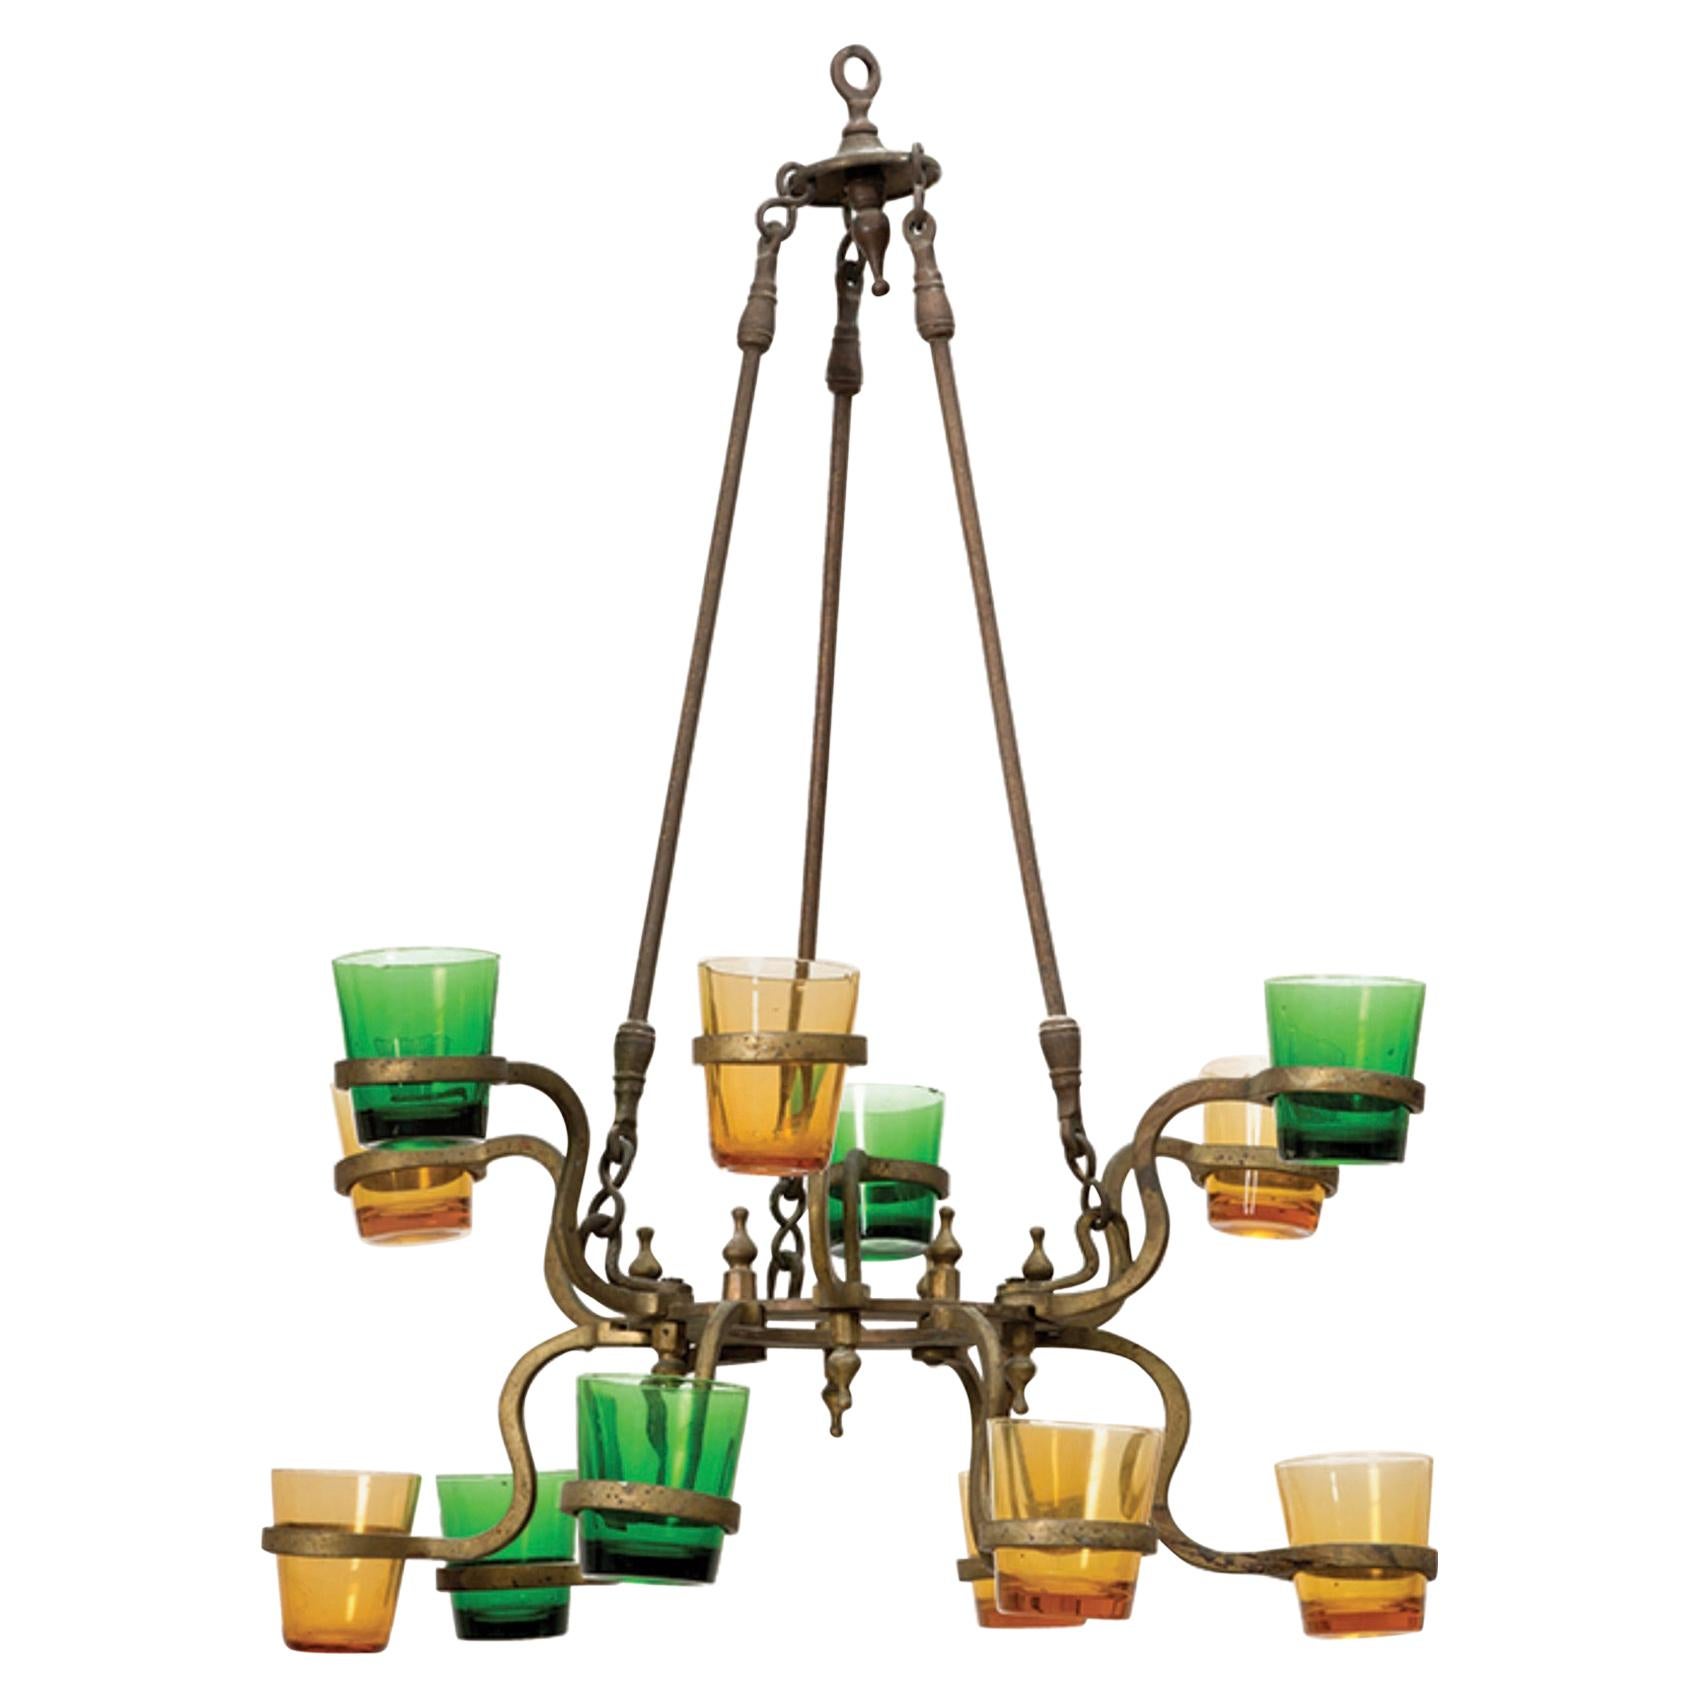 Early 20th Century Indian Brass Synagogue Lamp